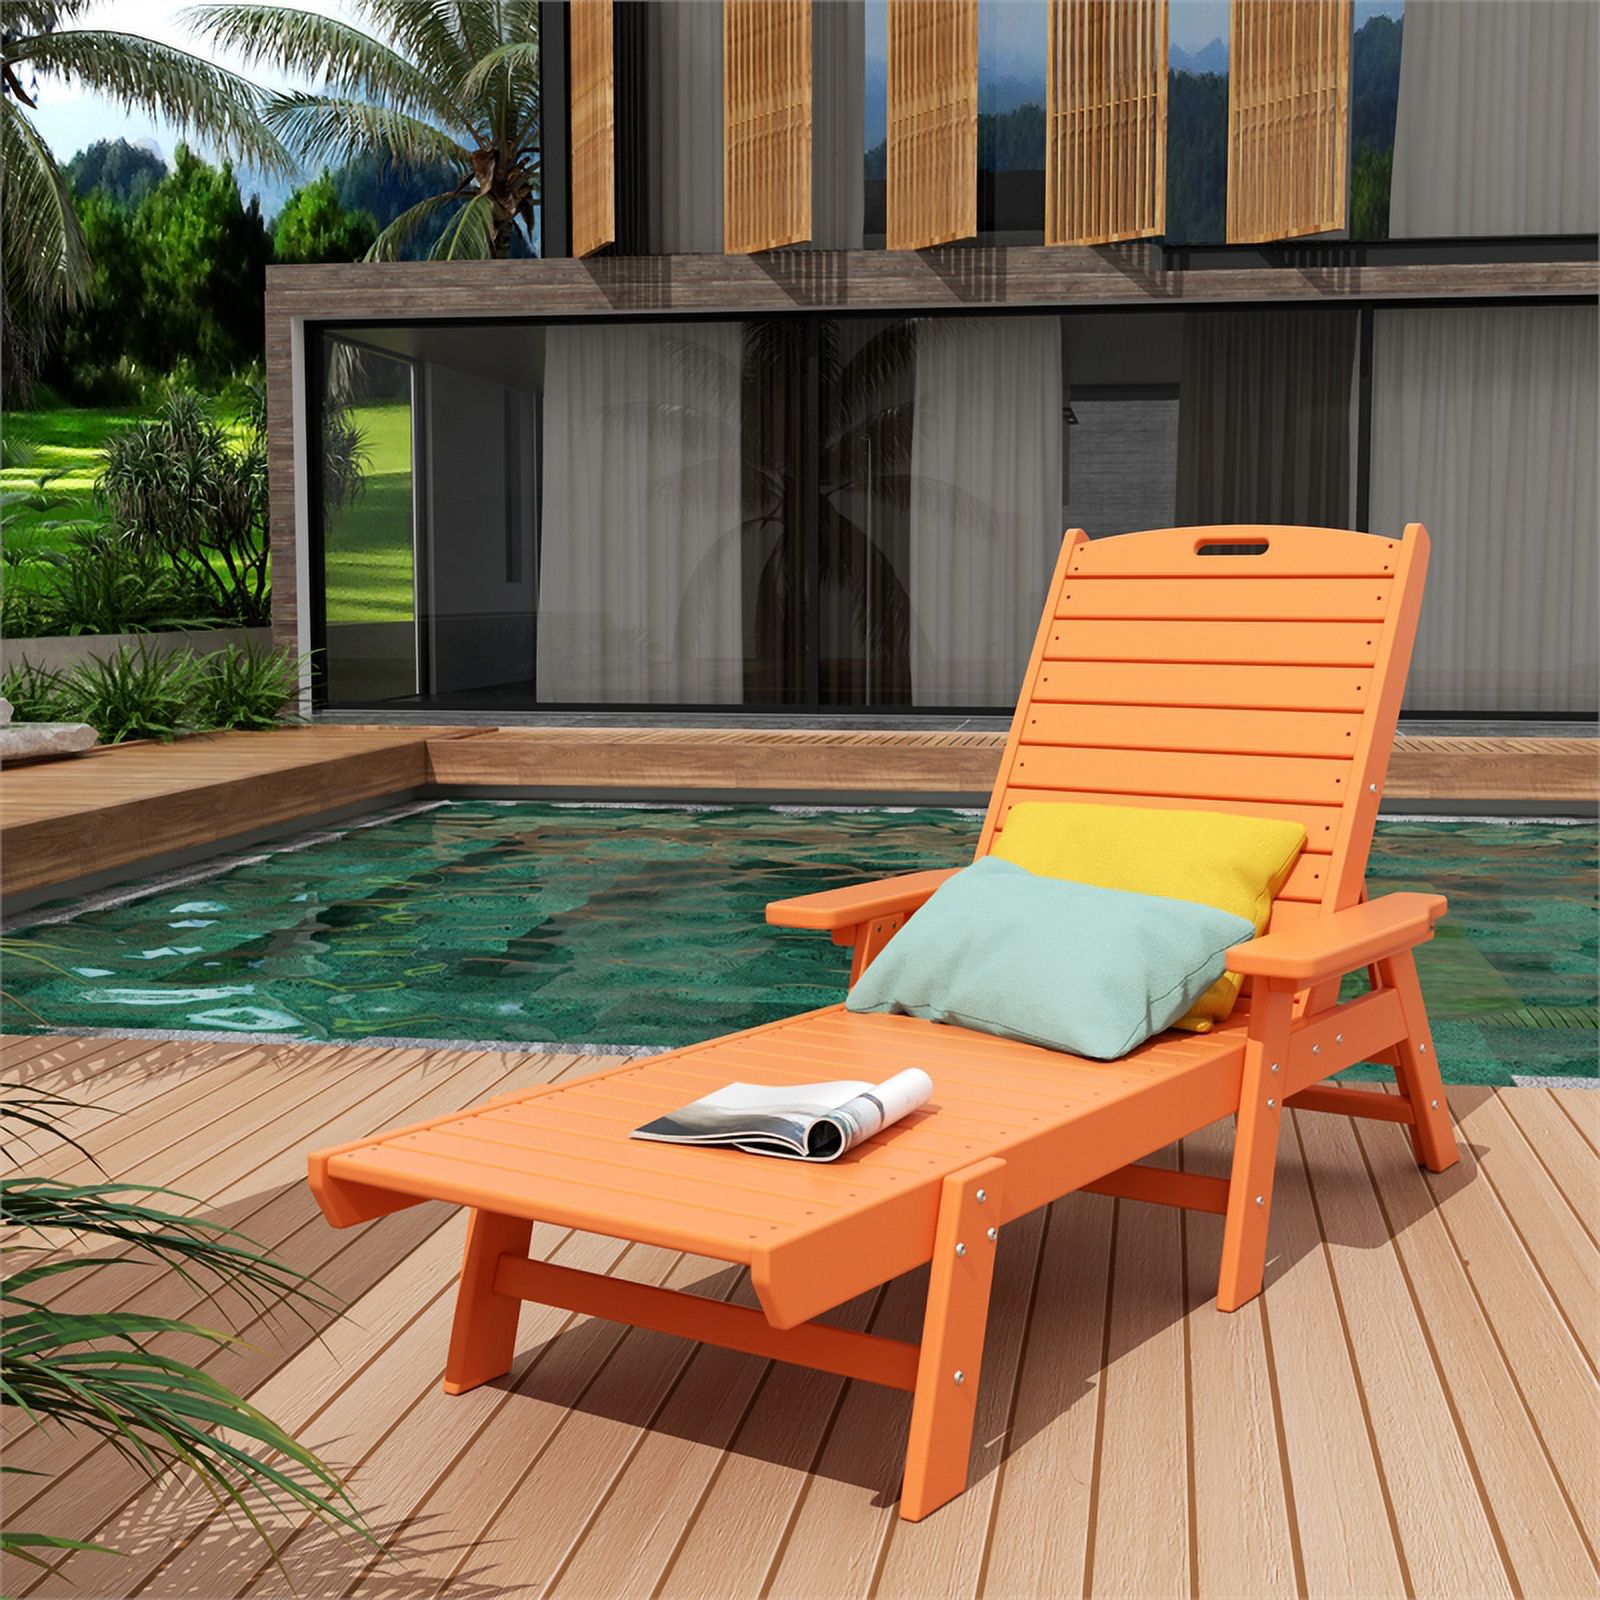 Afuera Living Coastal Outdoor HDPE Plastic Reclining Chaise Lounge in Orange - image 2 of 6